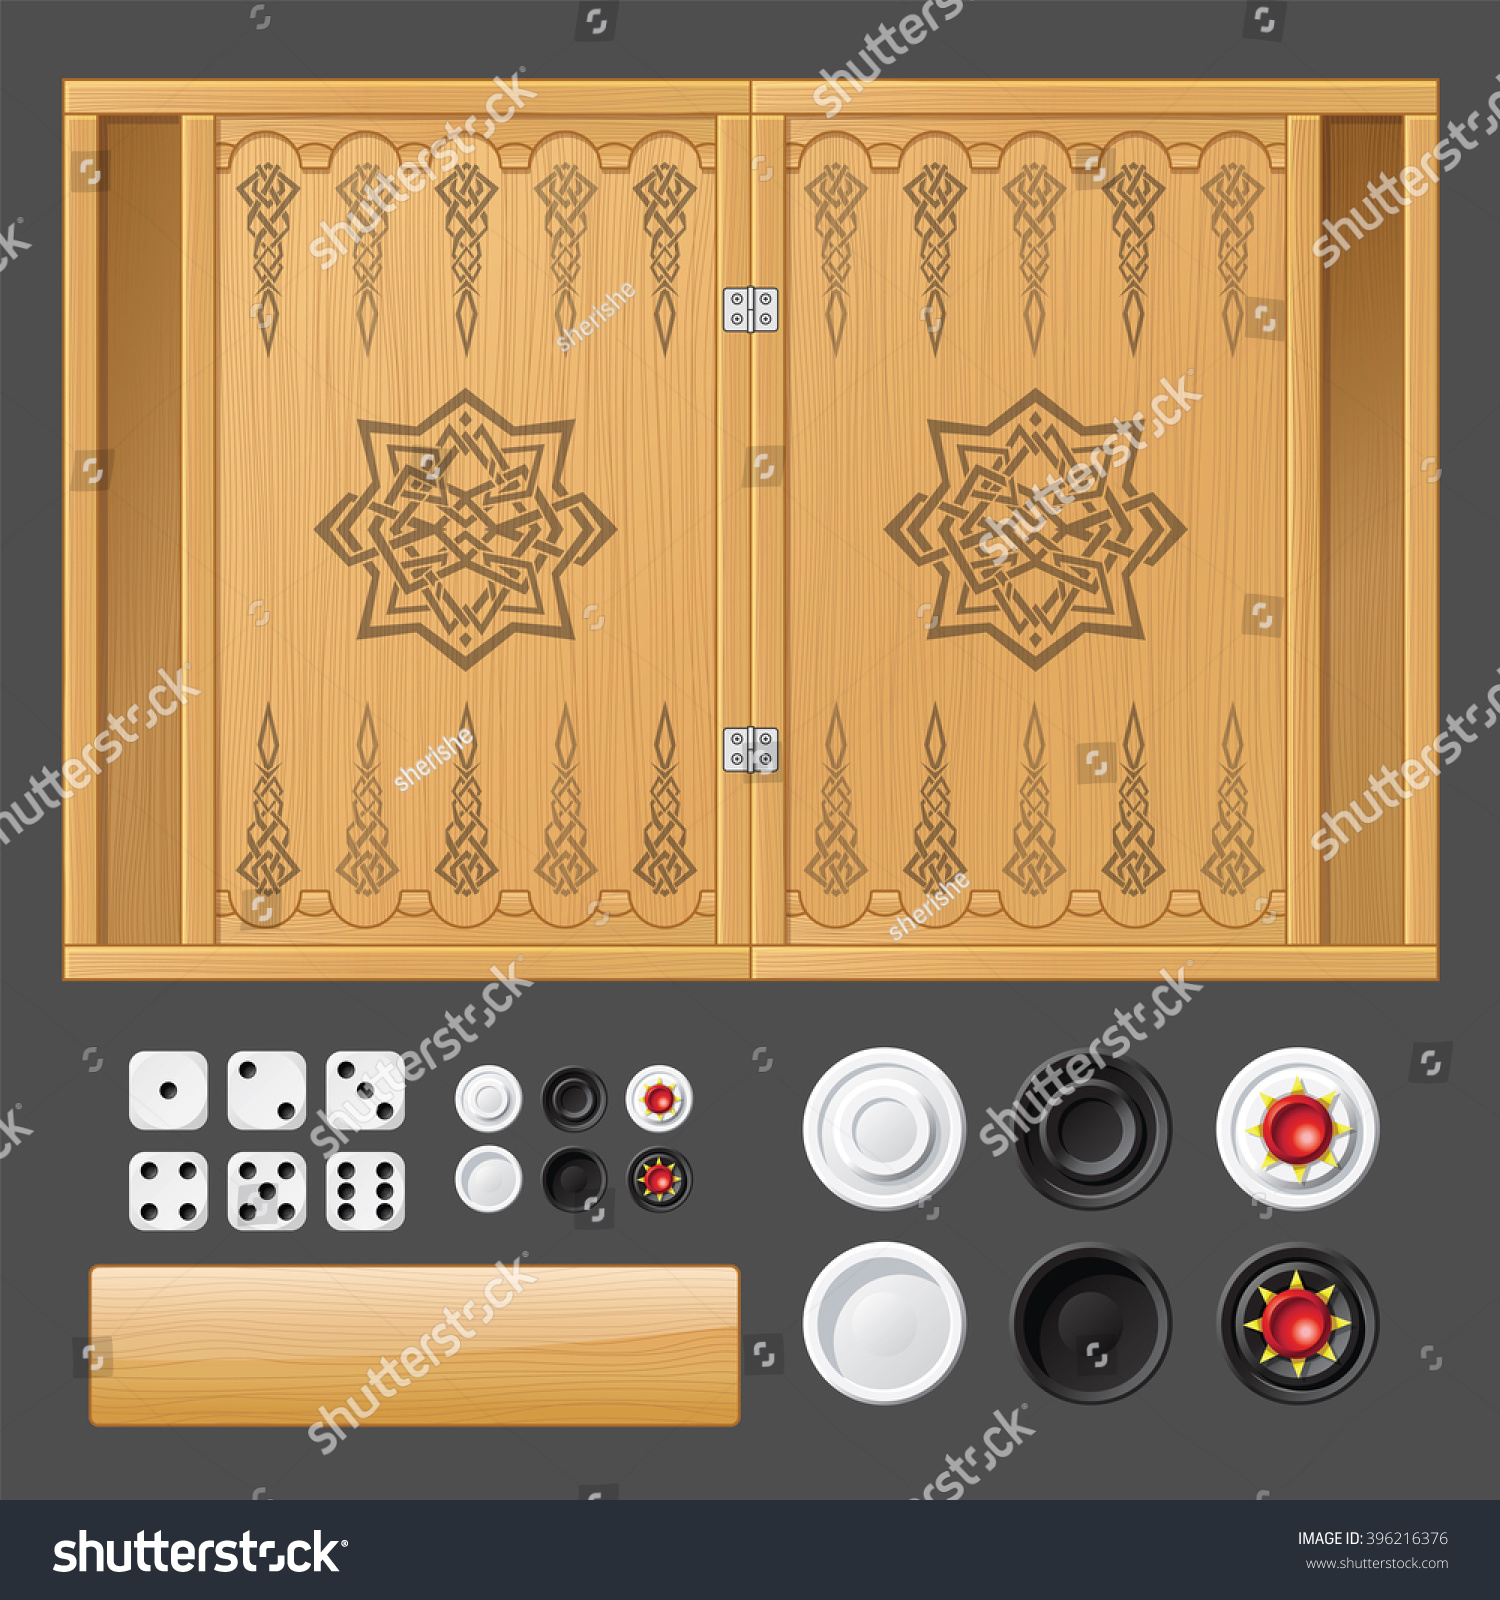 SVG of Template for backgammon game svg